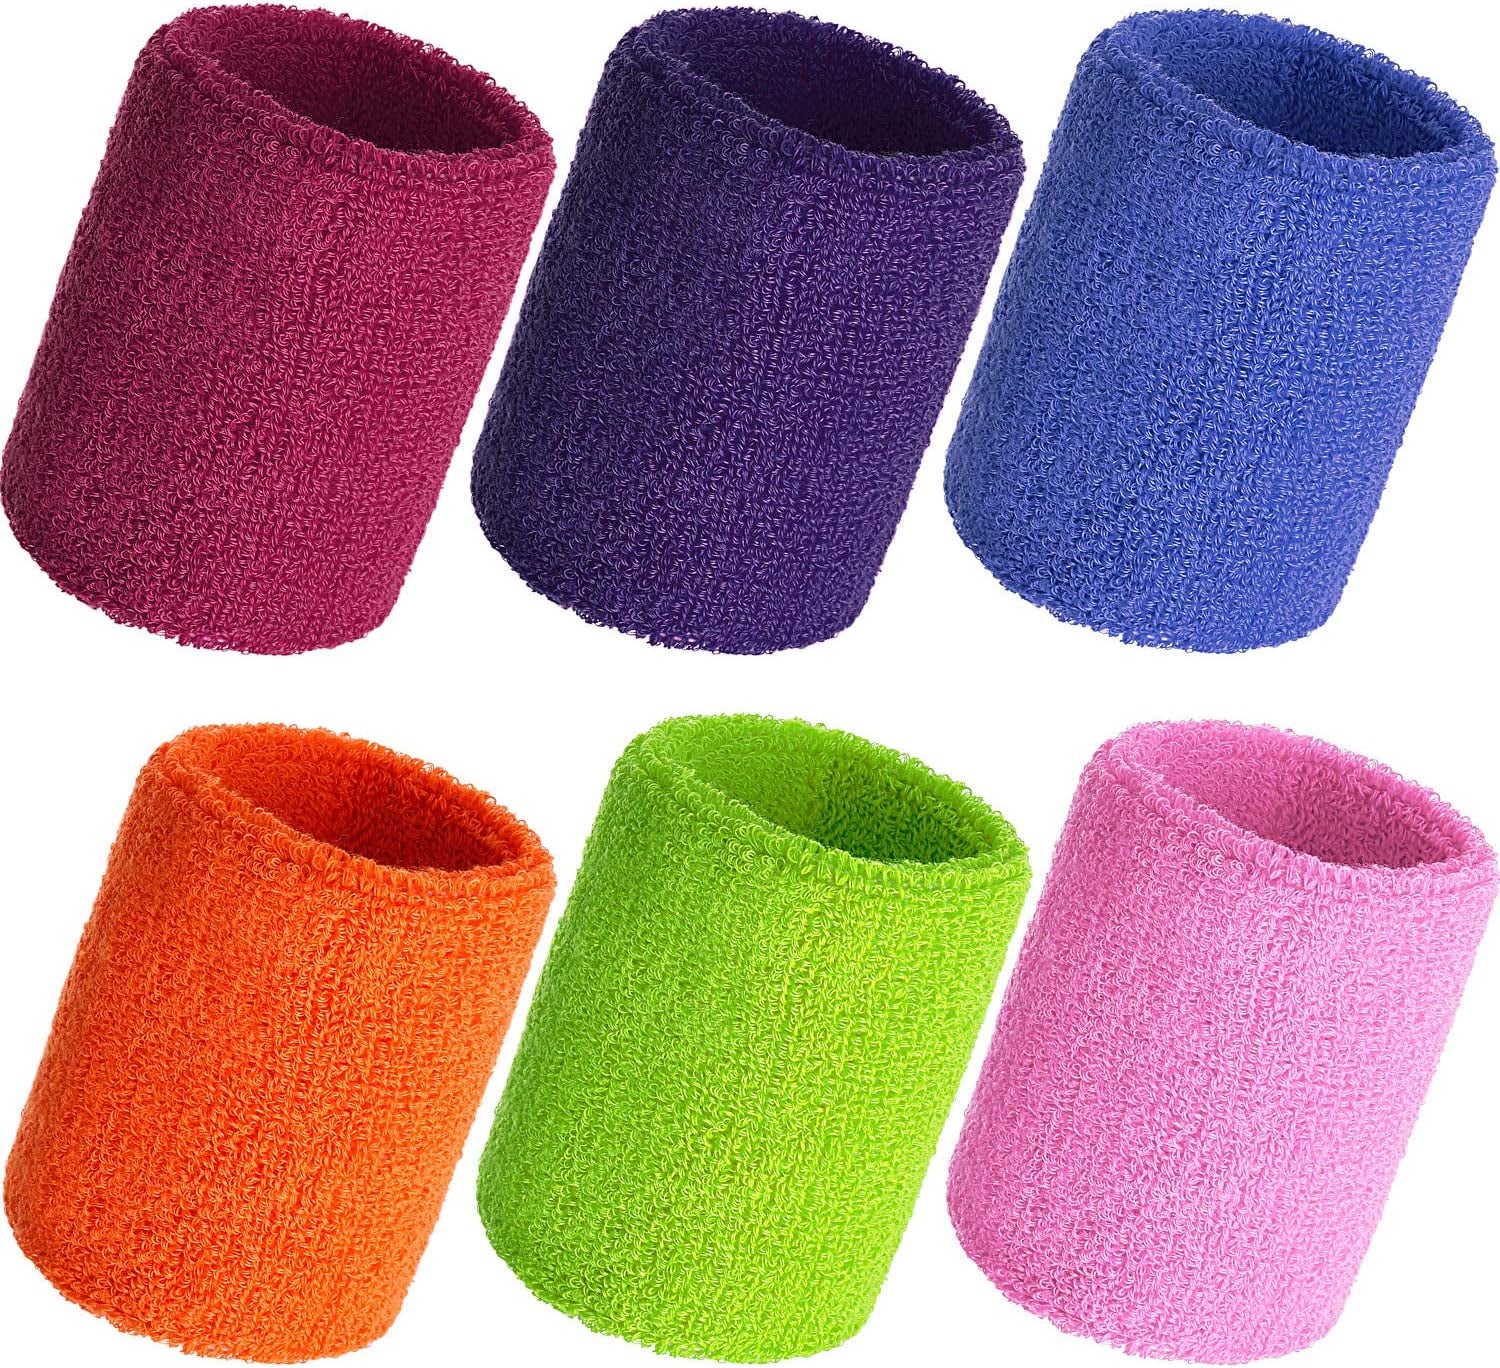 12 Pack Sweatbands Sports Wristband Cotton Sweat Band for Men and Women, Good for Tennis, Basketball, Running, Gym, Working Out